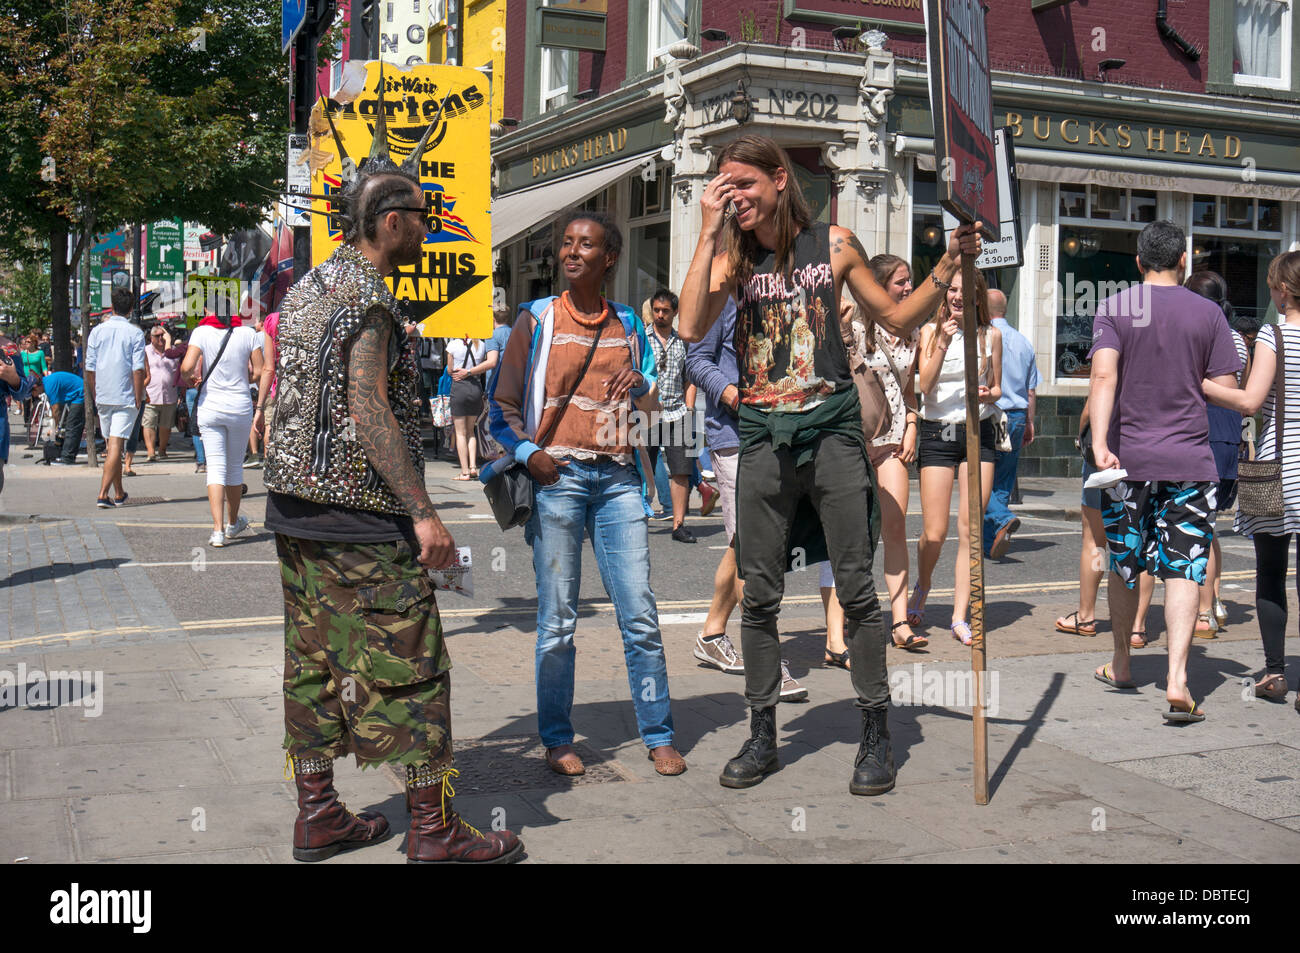 Local male characters hanging out on Camden high street, near Camden Market, London, England, UK. Stock Photo